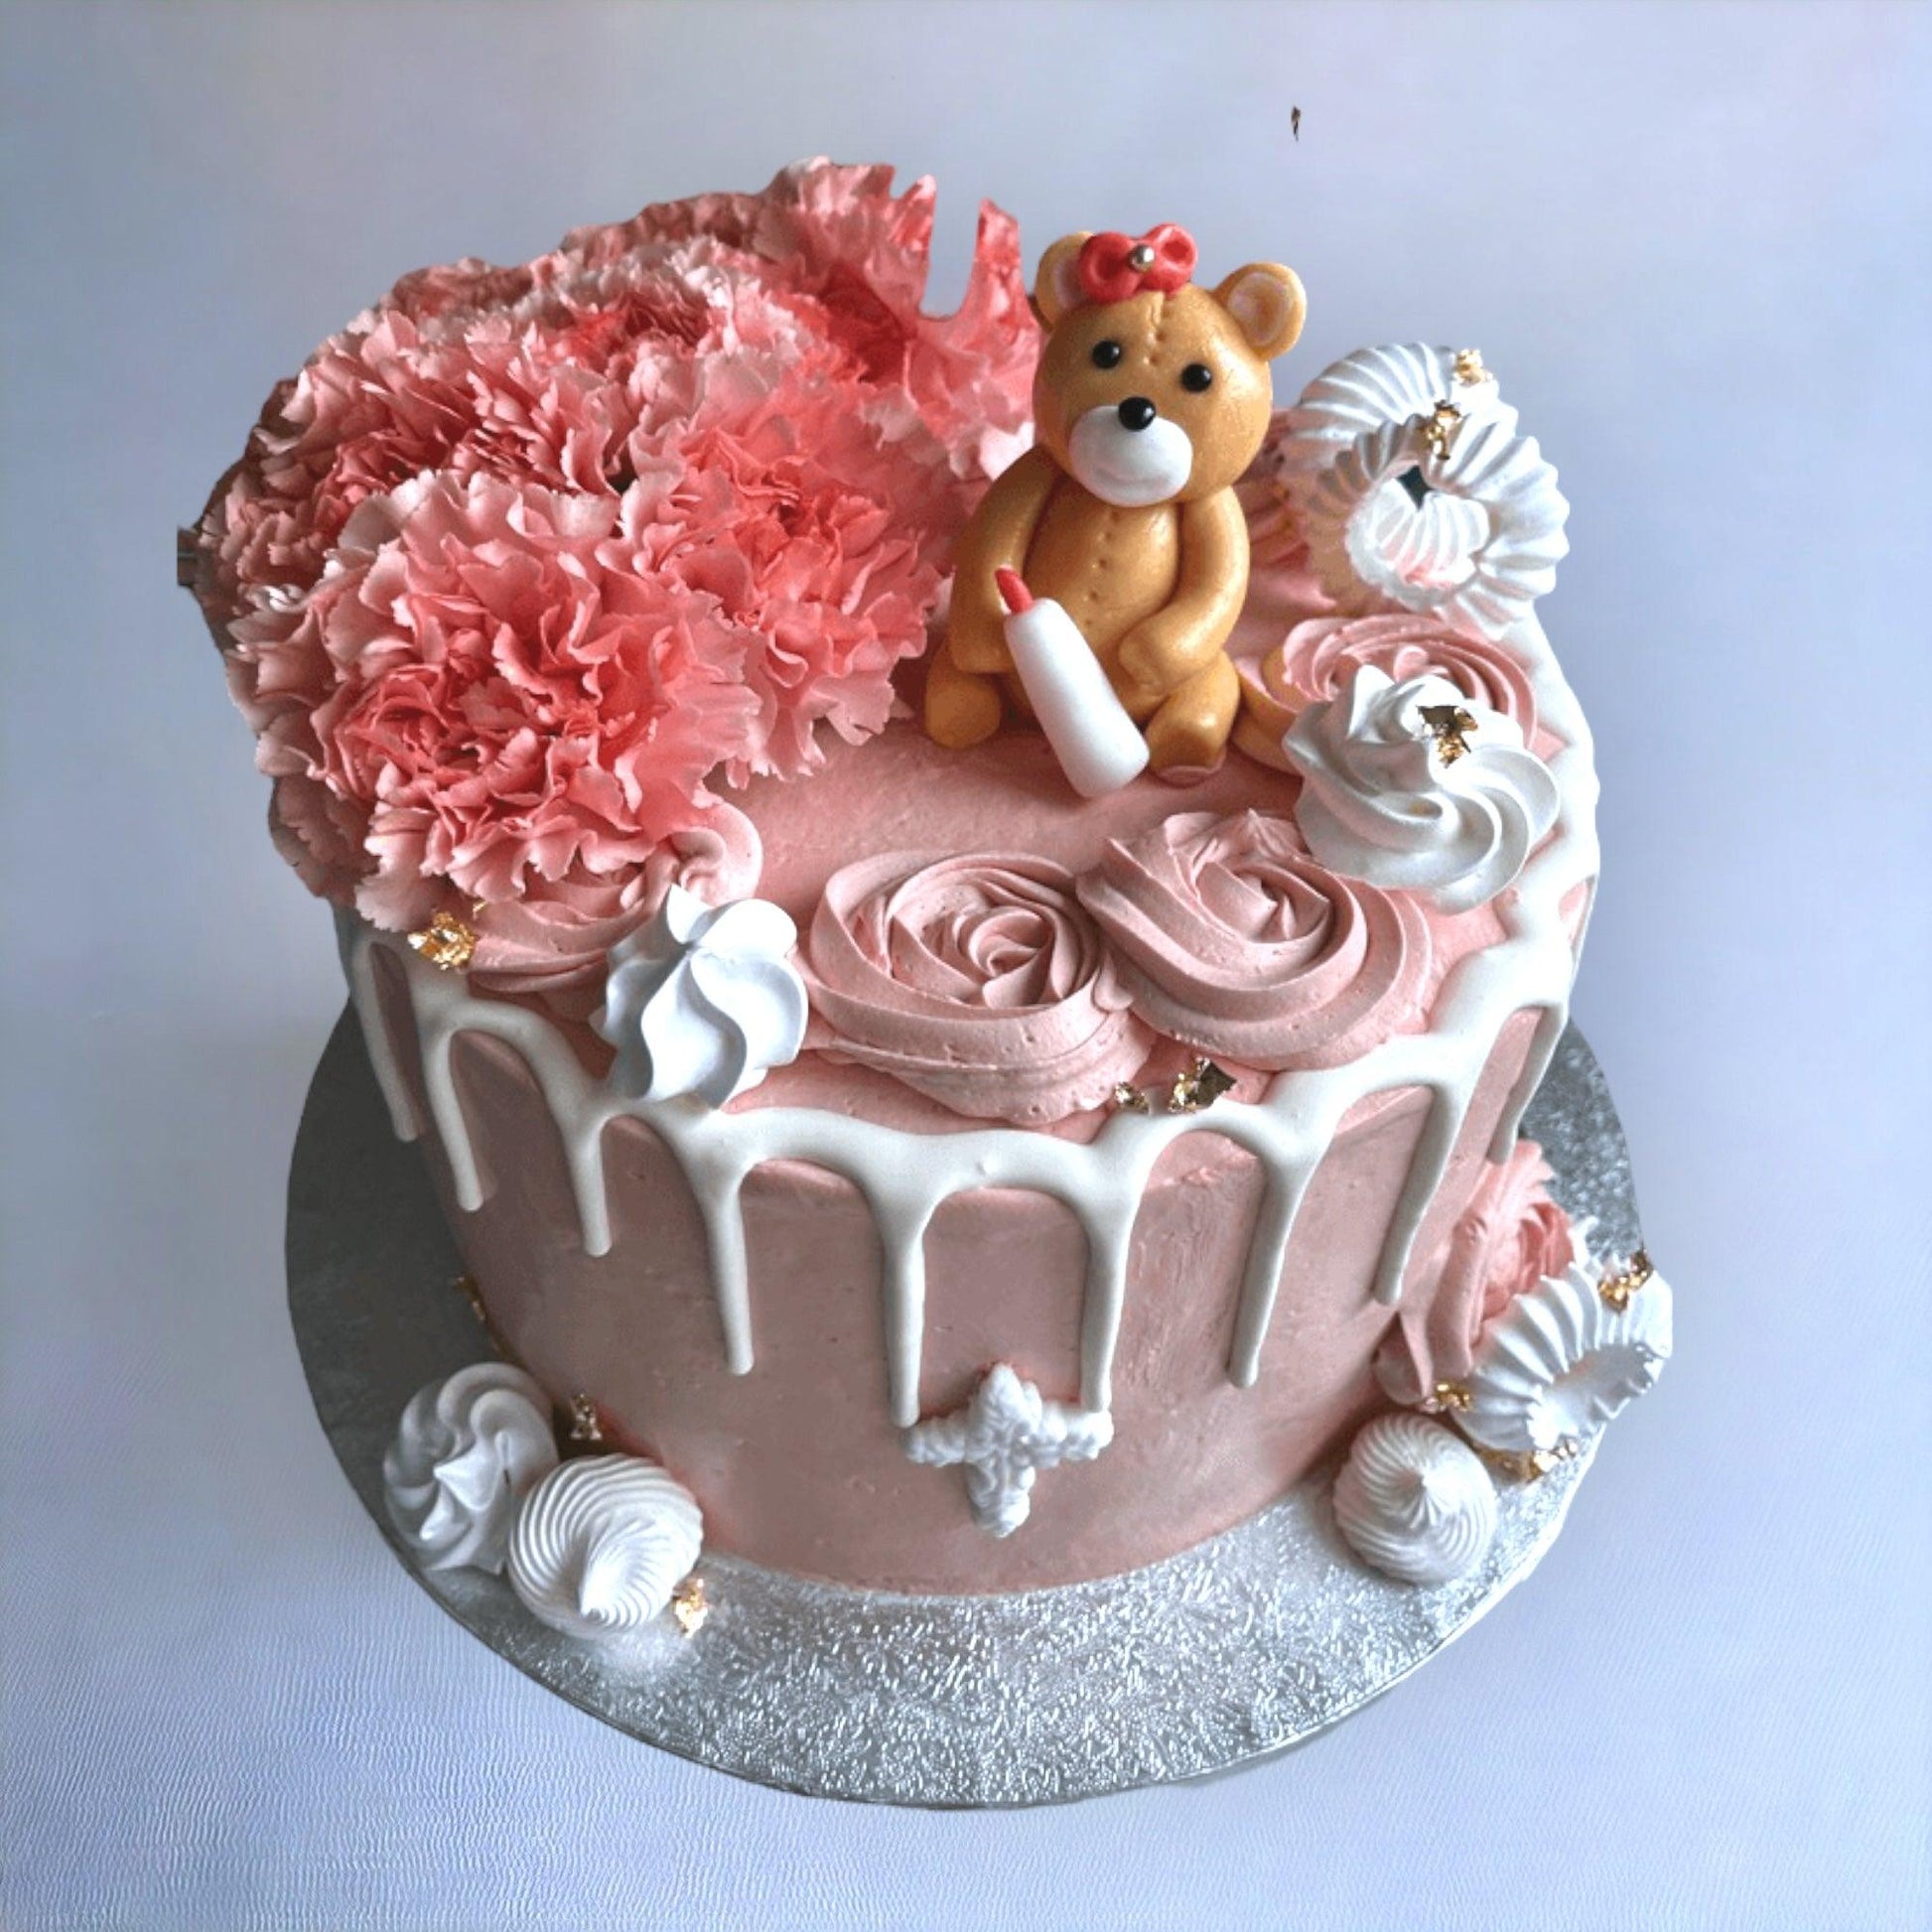 Christening cake with tedy bear - Naturally_deliciousss